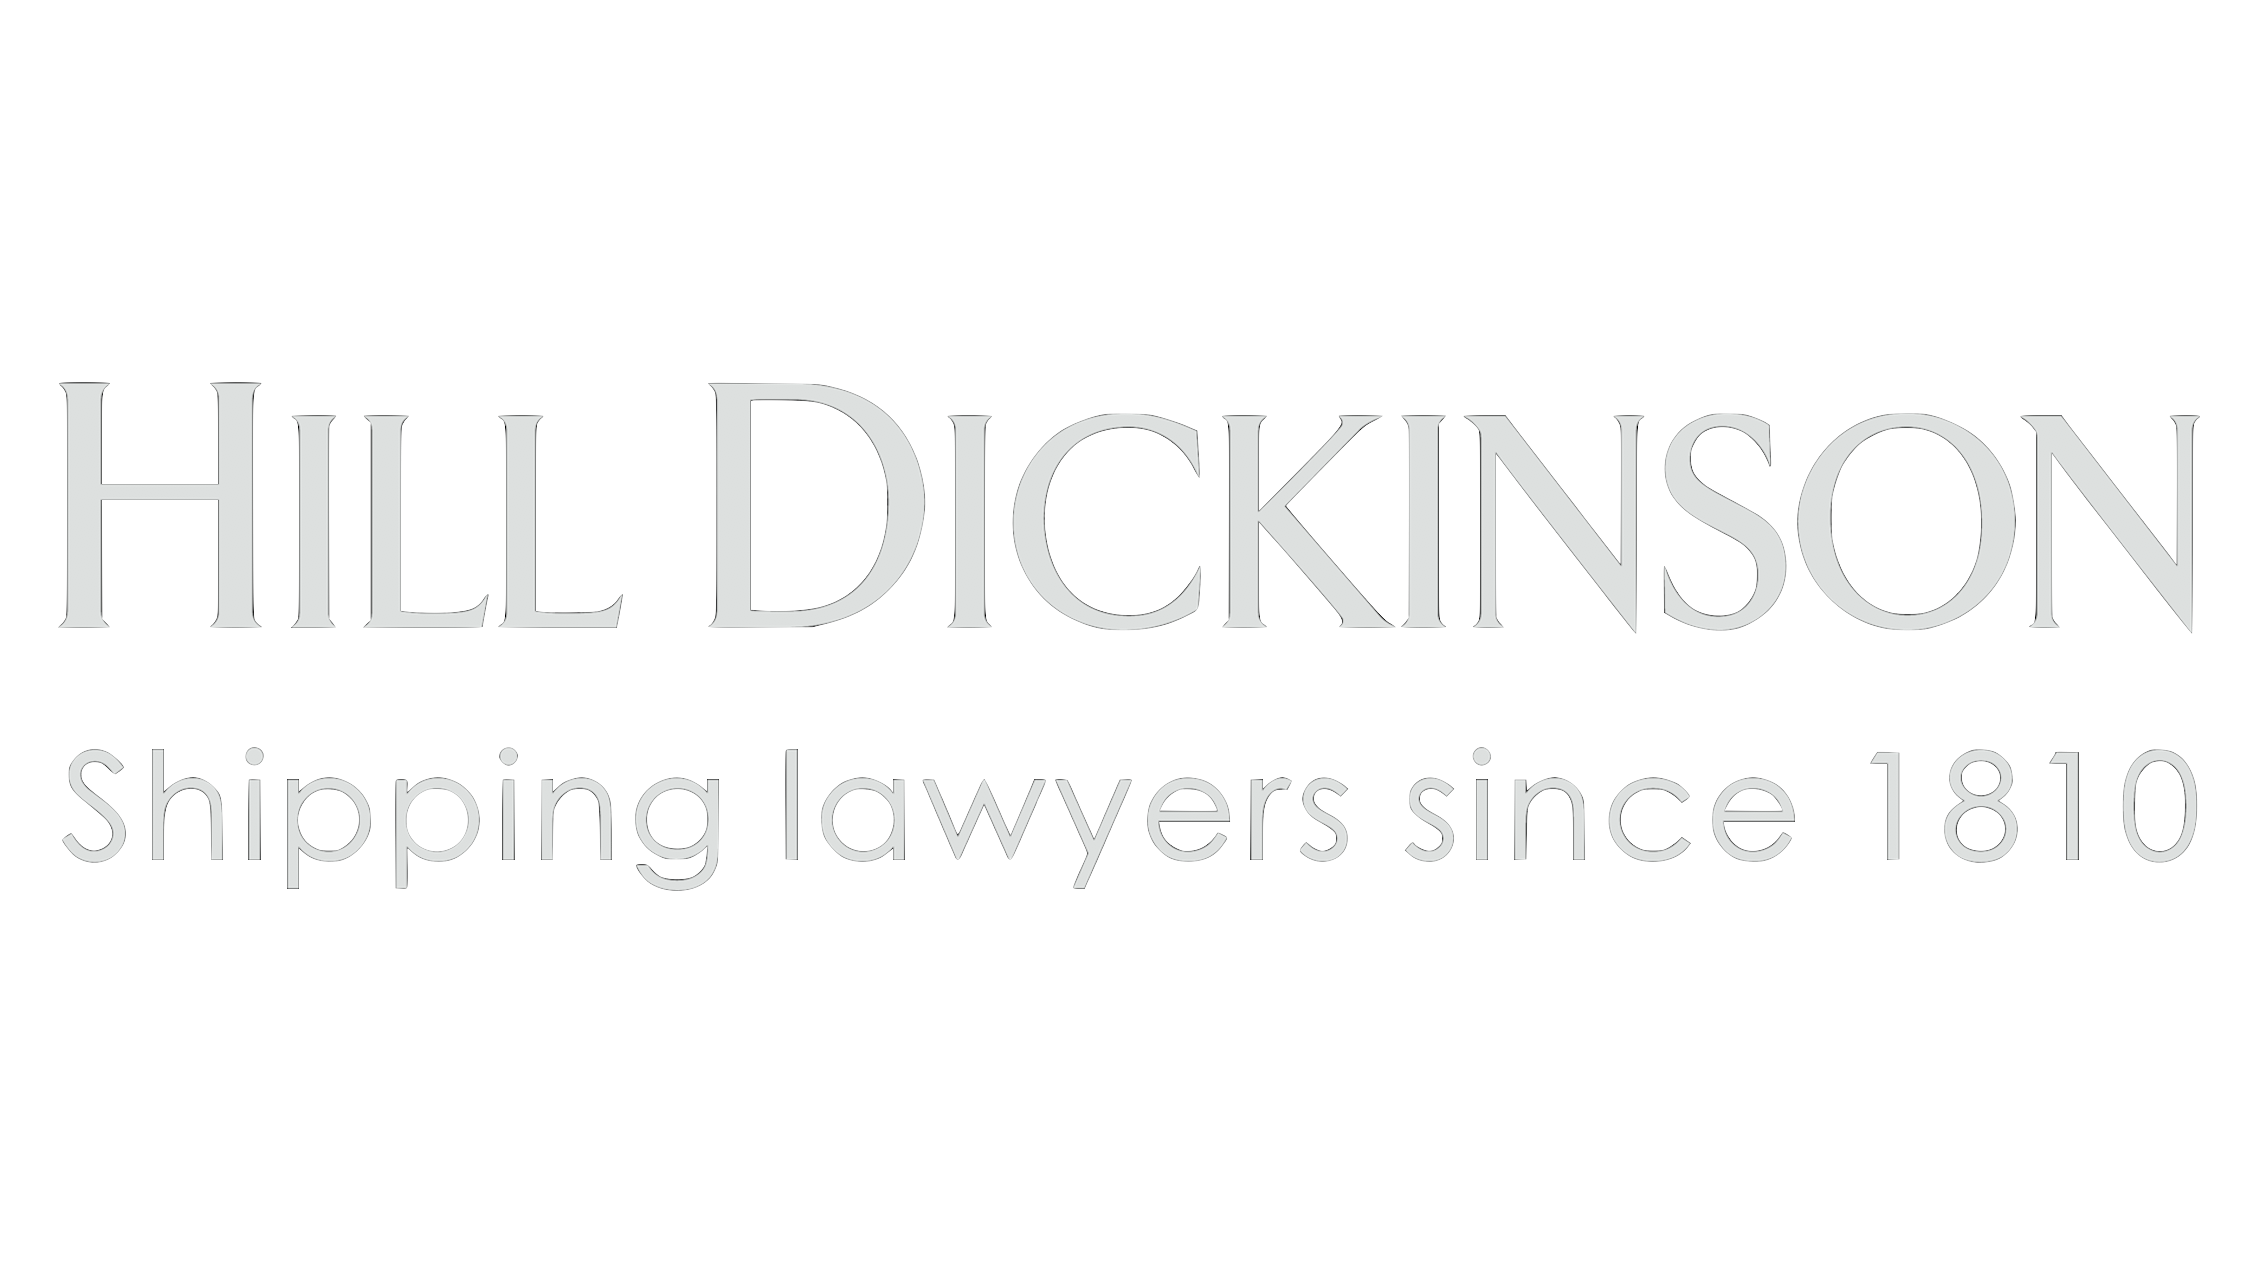 HILL DICKINSON A global commercial law firm